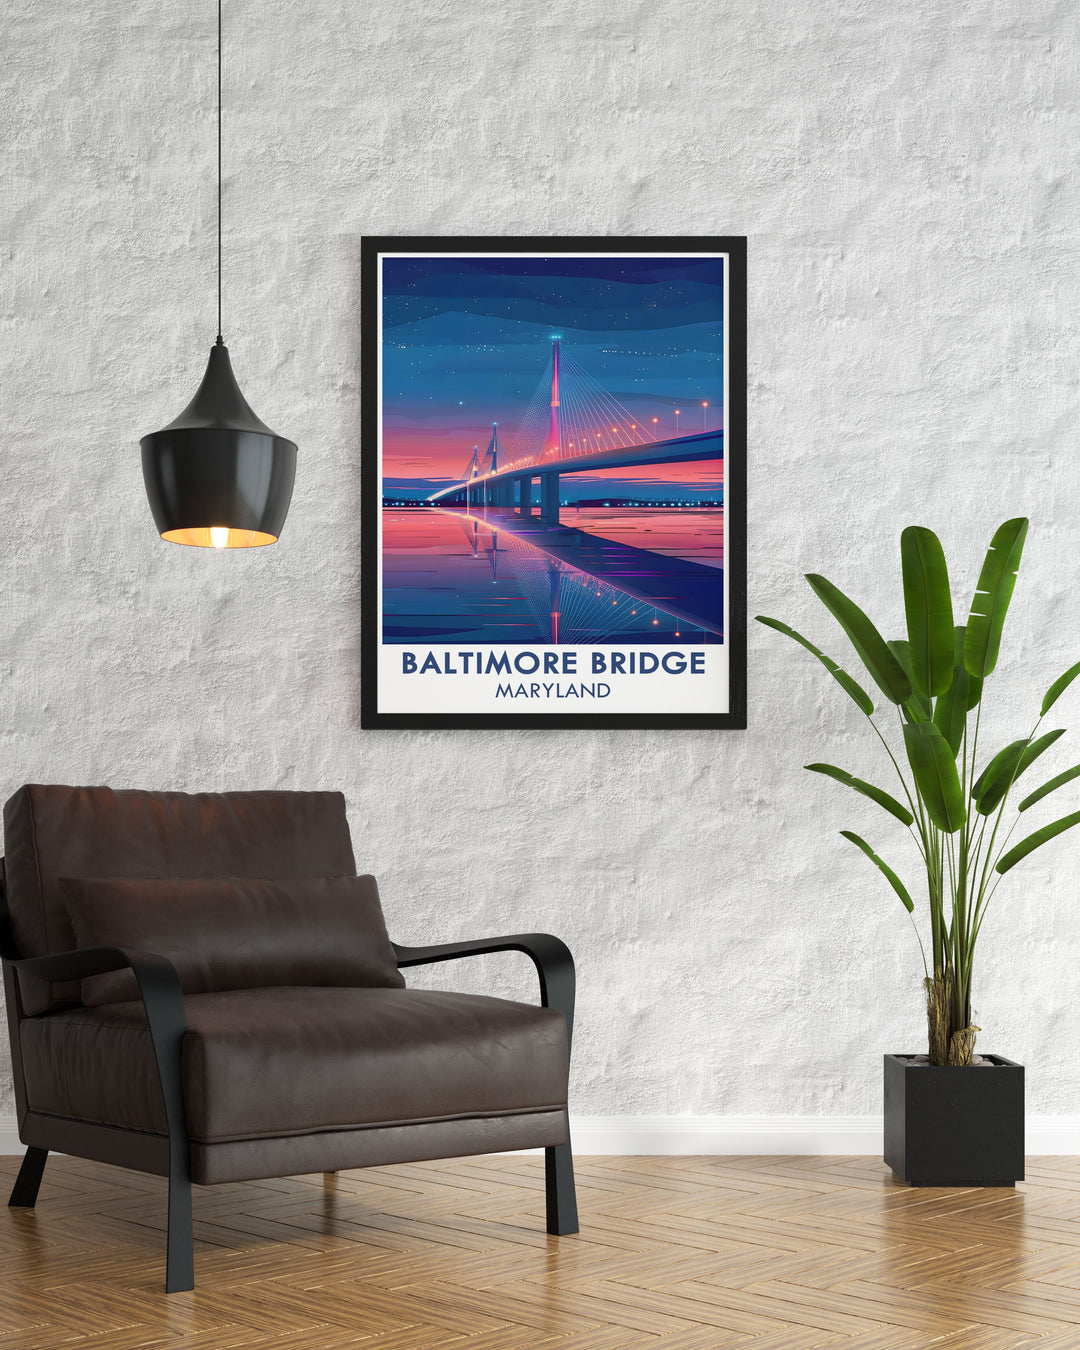 Exclusive design poster of the New Francis Scott Key Bridge, a vibrant addition to any Maryland-themed decor. This Baltimore bridge artwork is perfect for Maryland travel posters and makes a thoughtful housewarming gift.